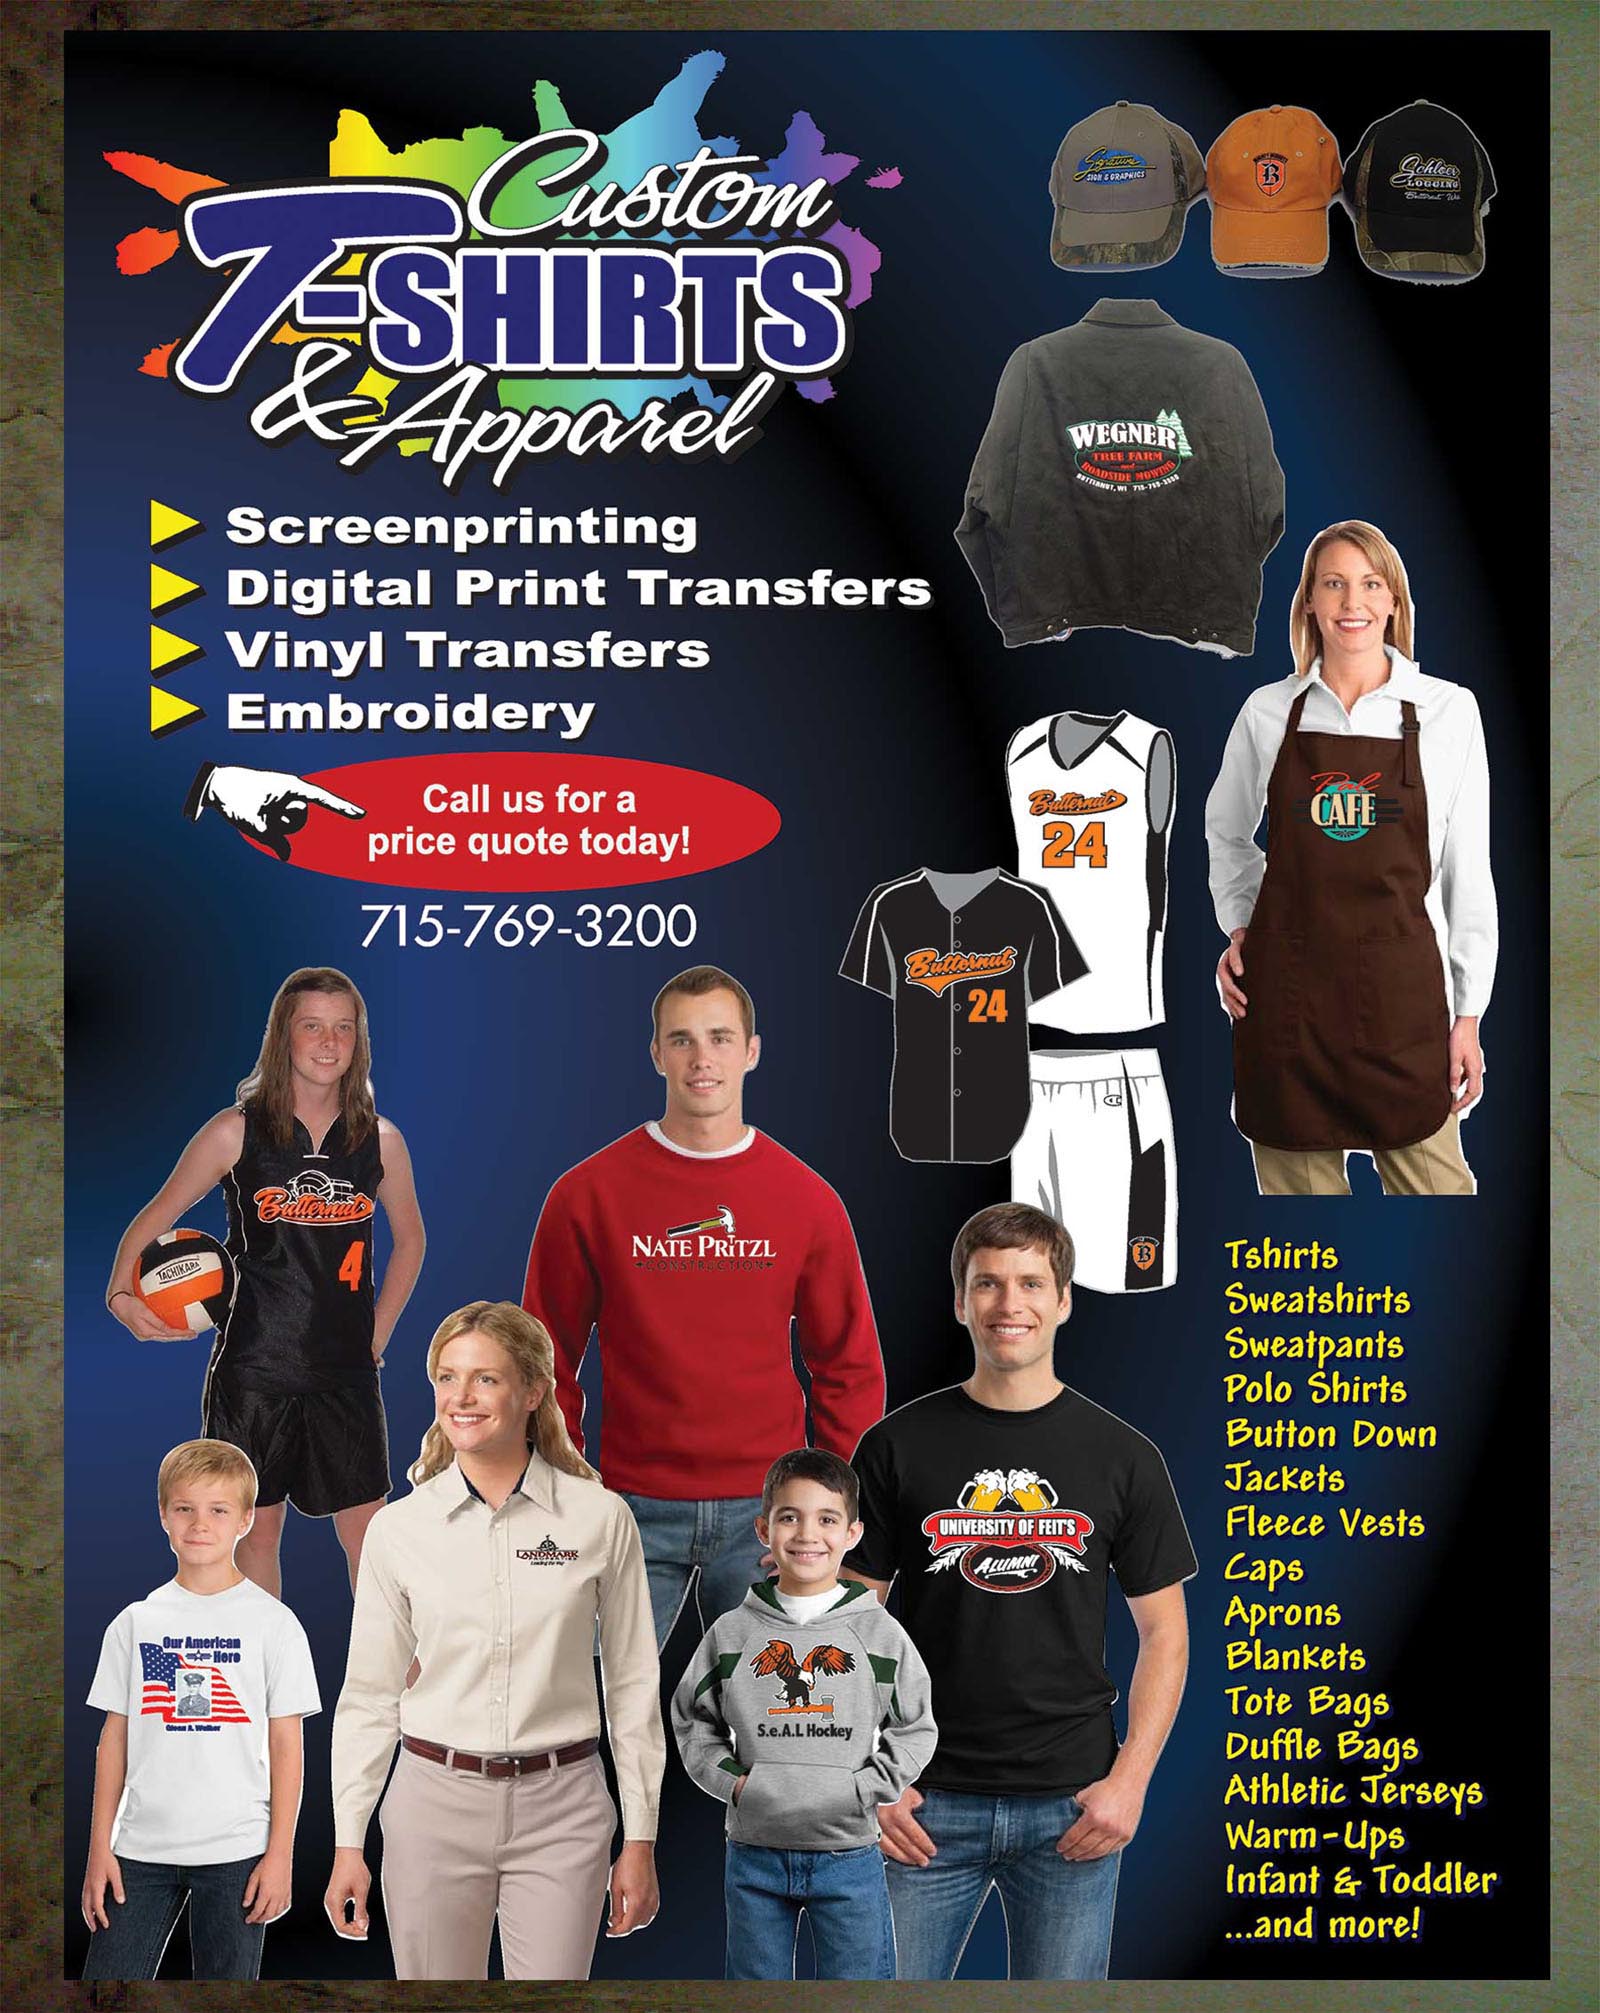 We offer a wide selection of custom apparel.  Tshirts, sweatshirts, sweatpants, polo shirts, button down, jackets, fleece vests, caps, aprons, blankets, tote bags, duffle bags, athletic jerseys, warm-ups, infants and toddler clothing.